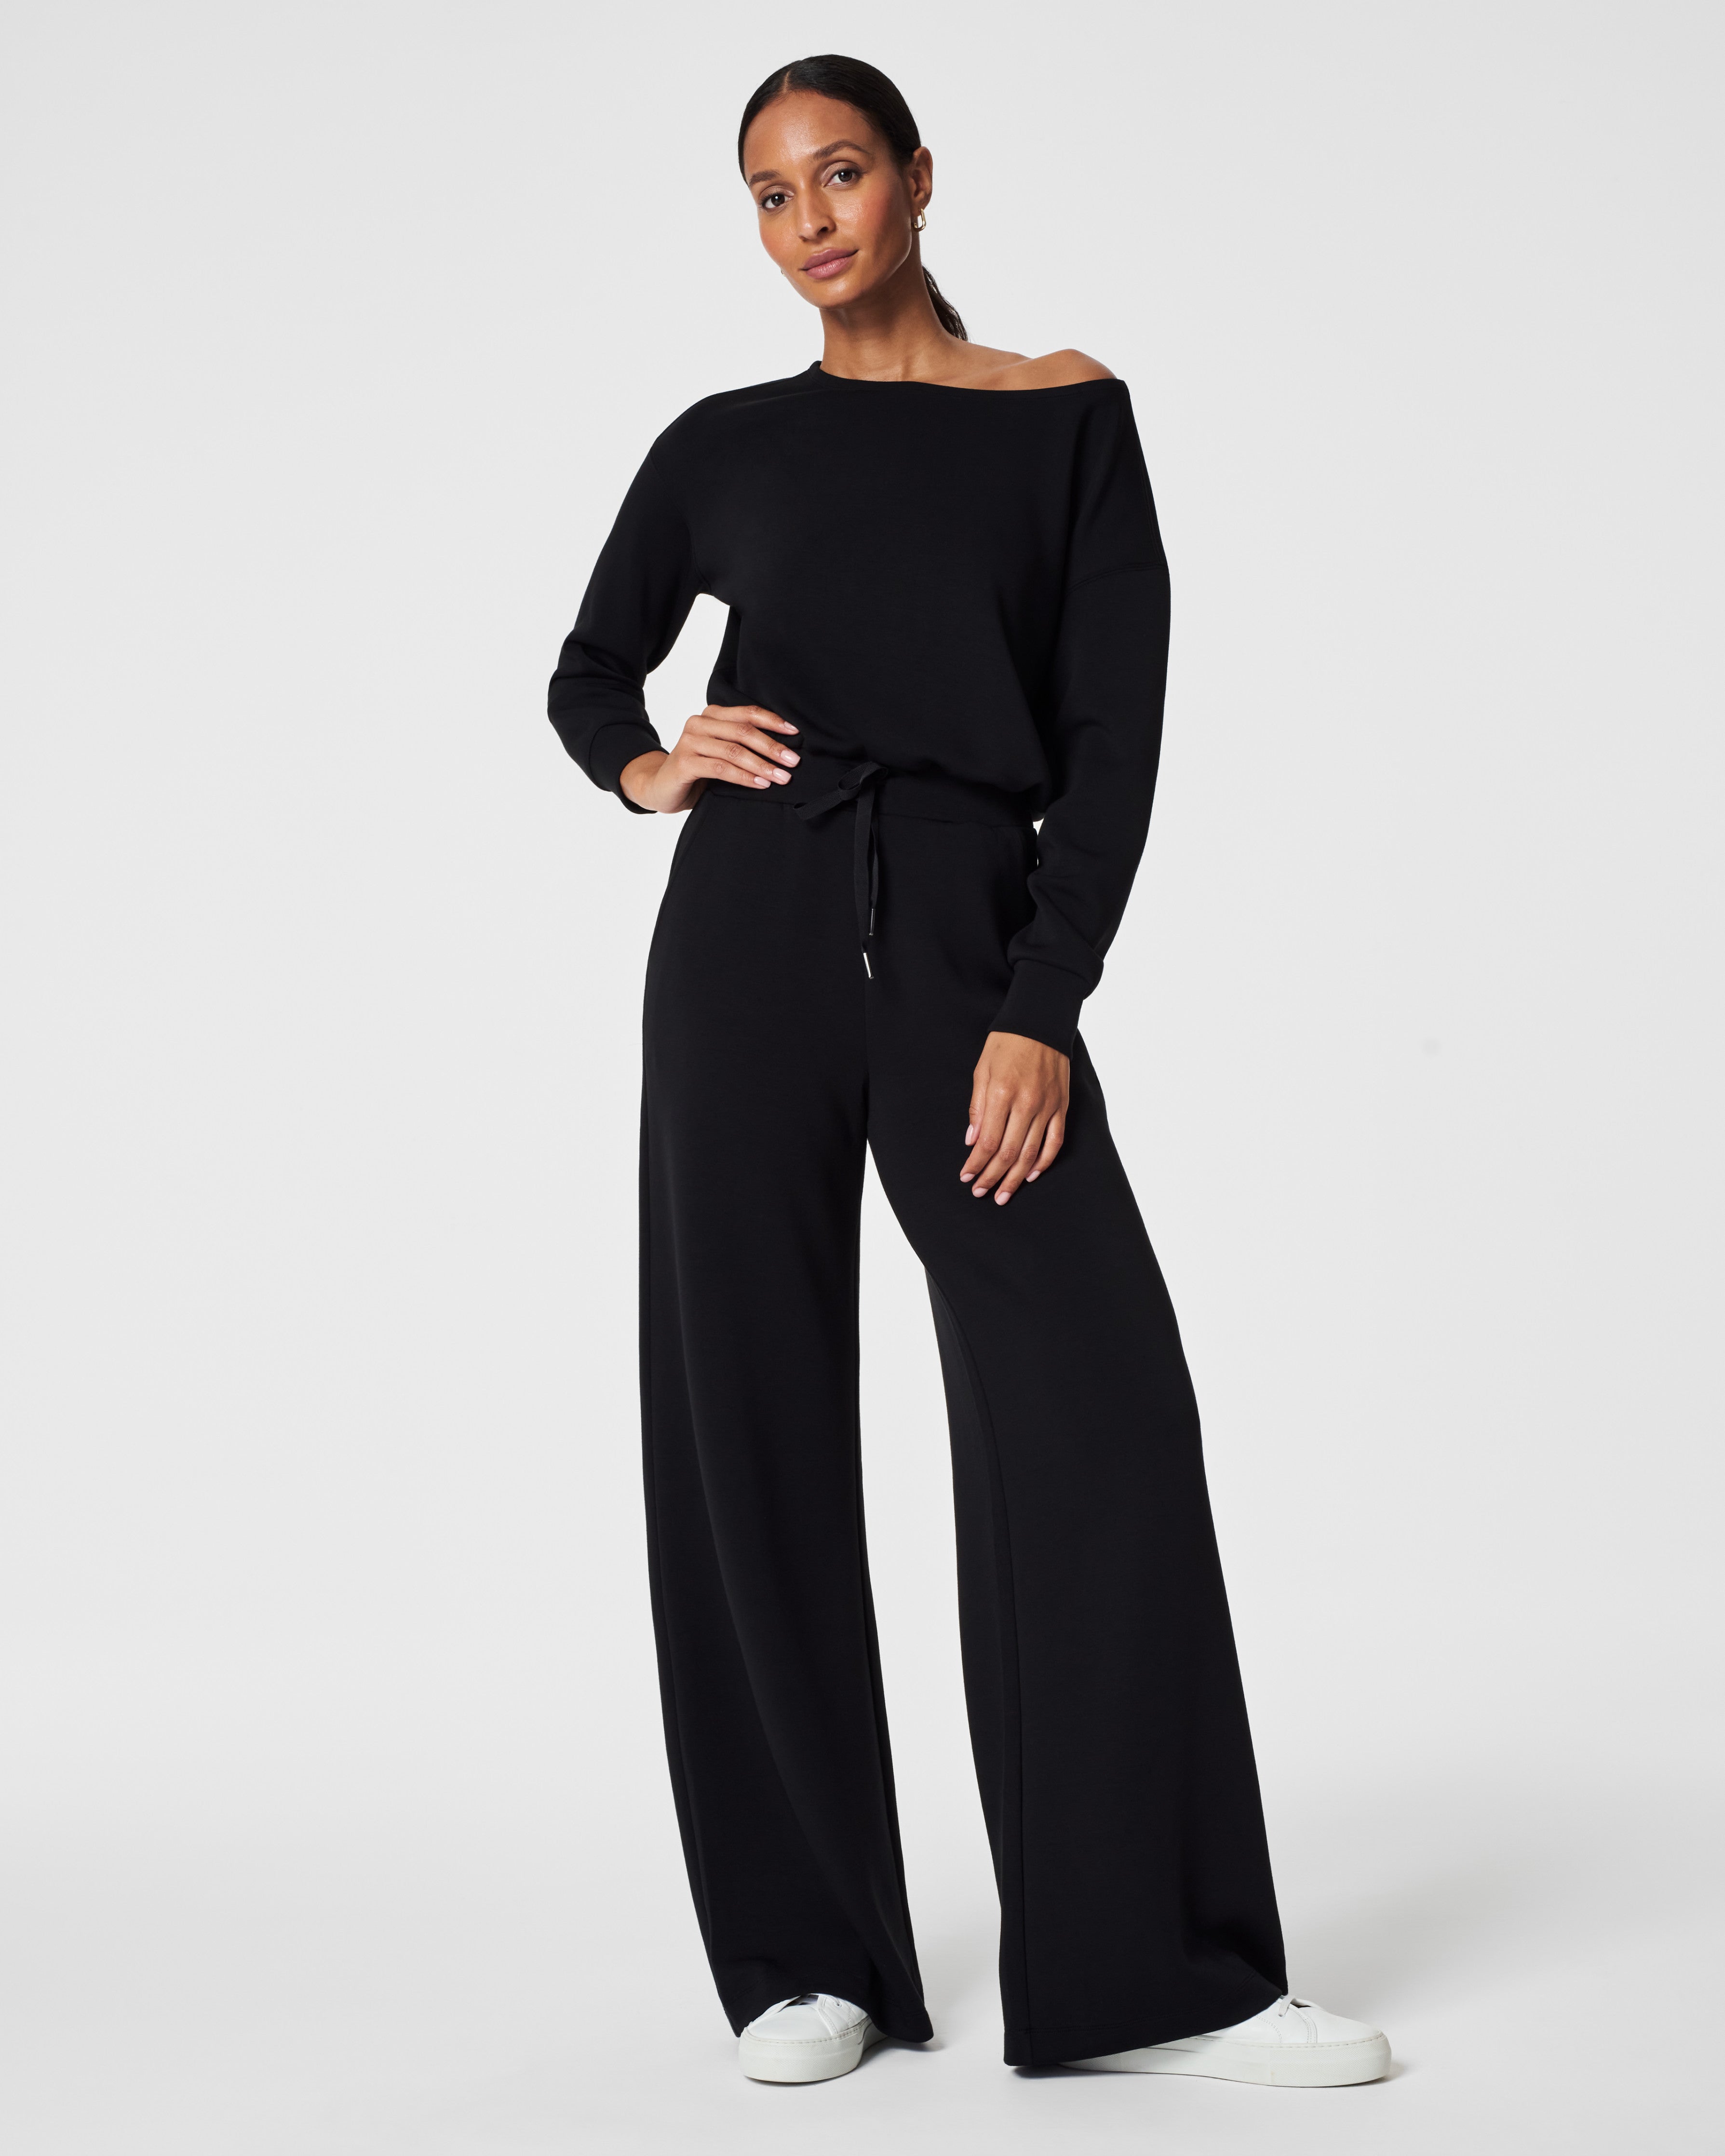 This Jumpsuit Sold Out 3 Times - Spanx